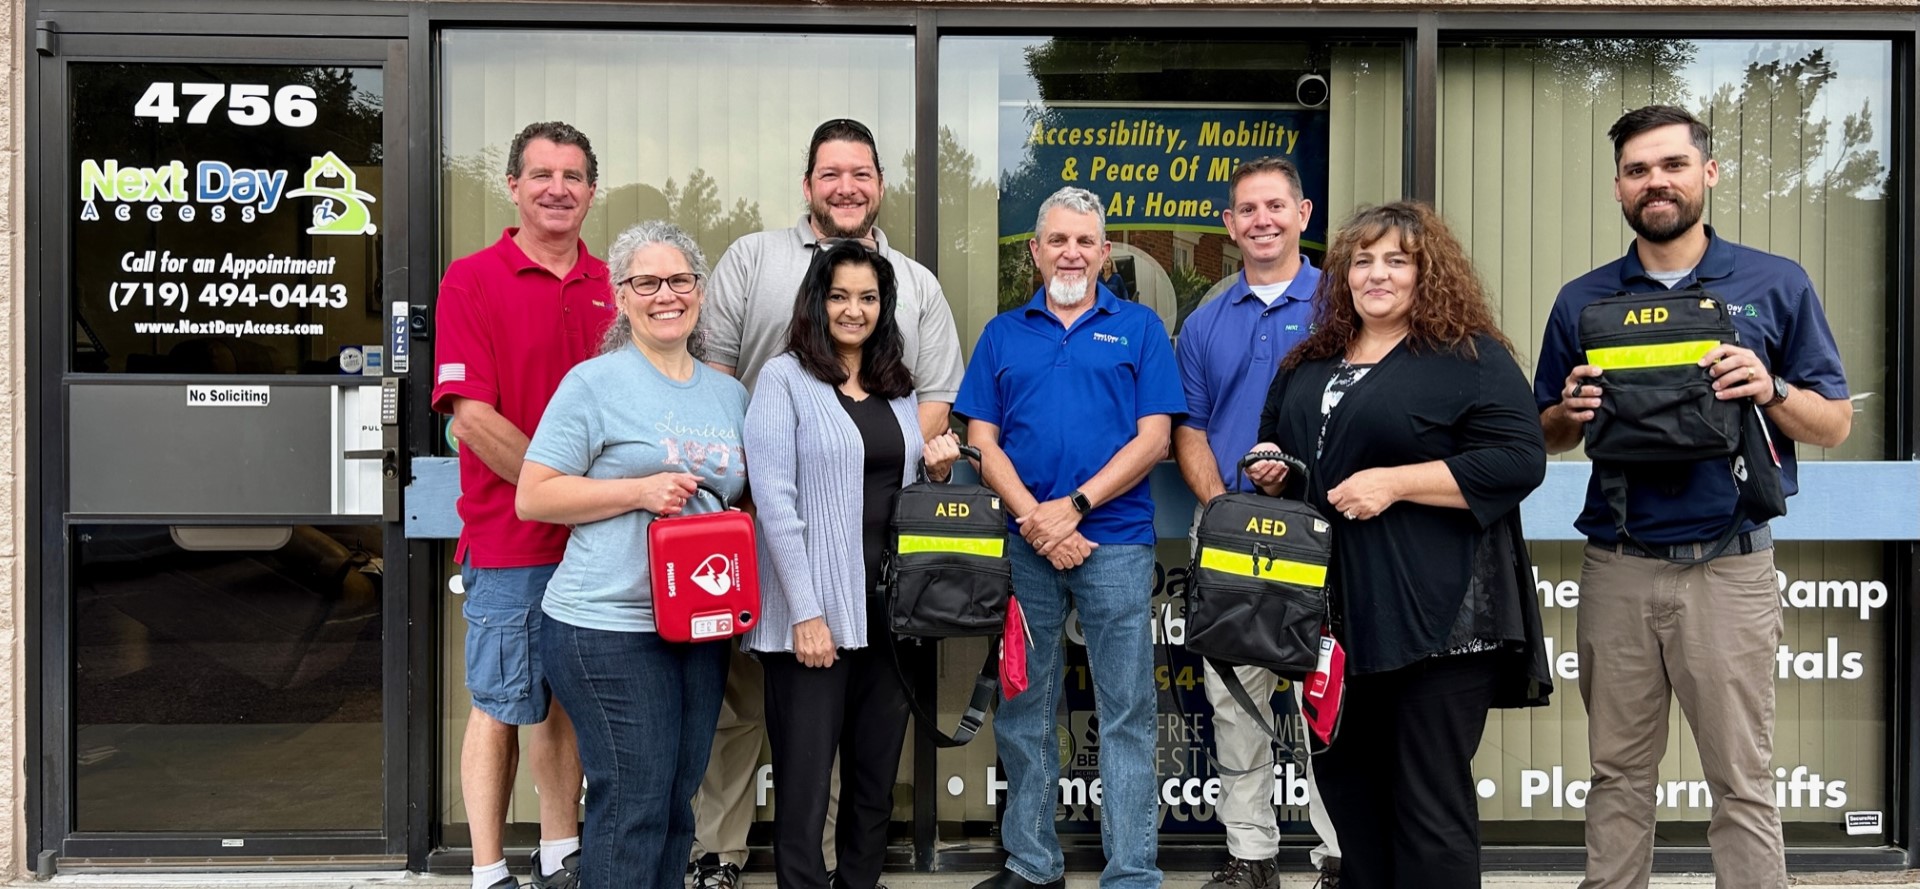 Next Day Access Colorado Springs Receives Funds for AEDs